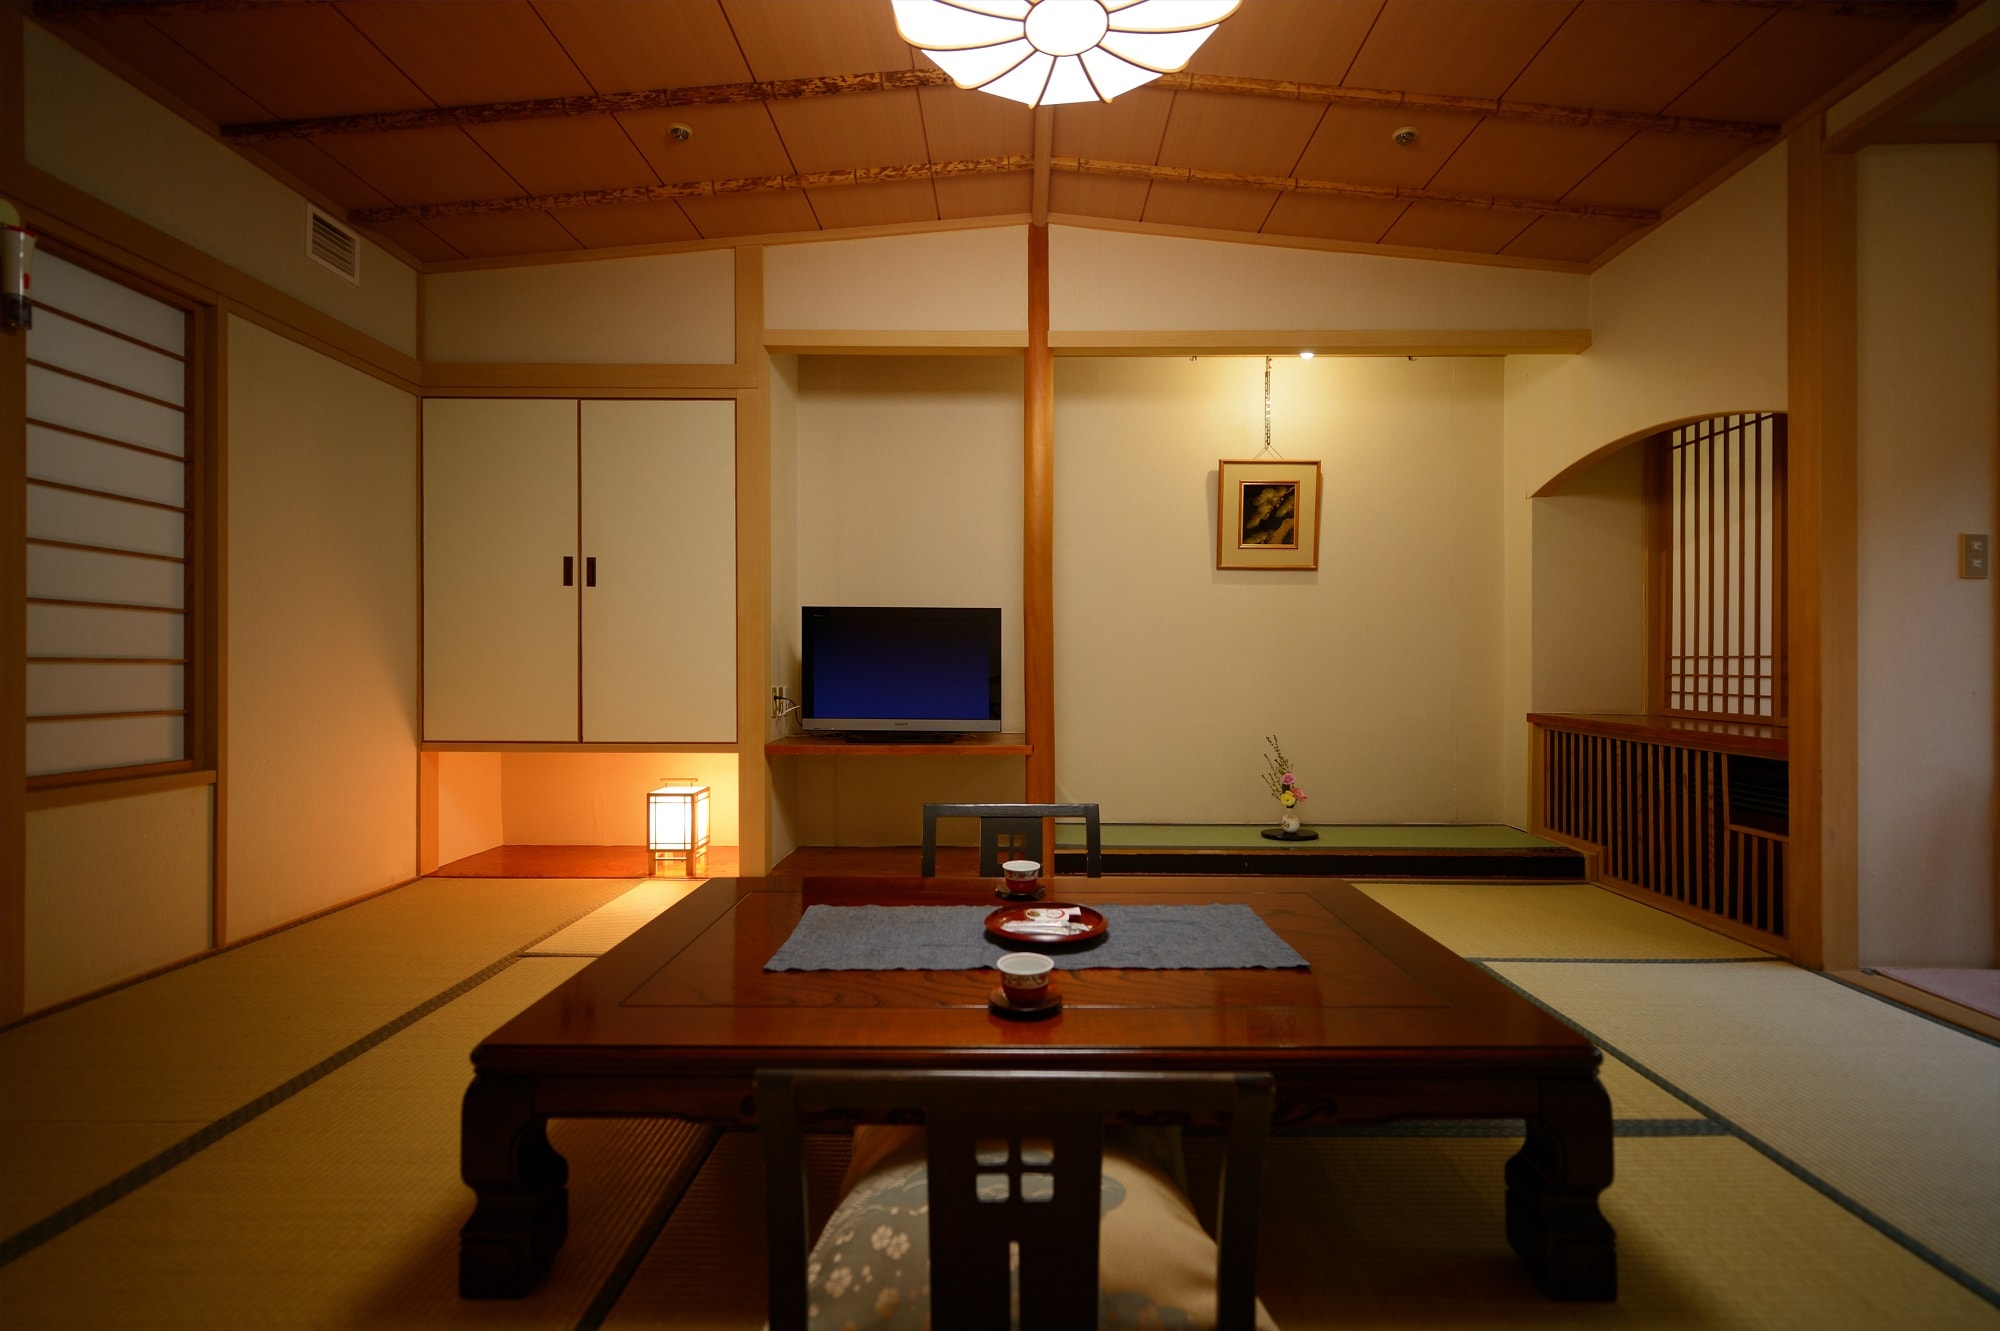 "Shinonome" standard type room. There is an air purifier with free WiFi and humidification function.